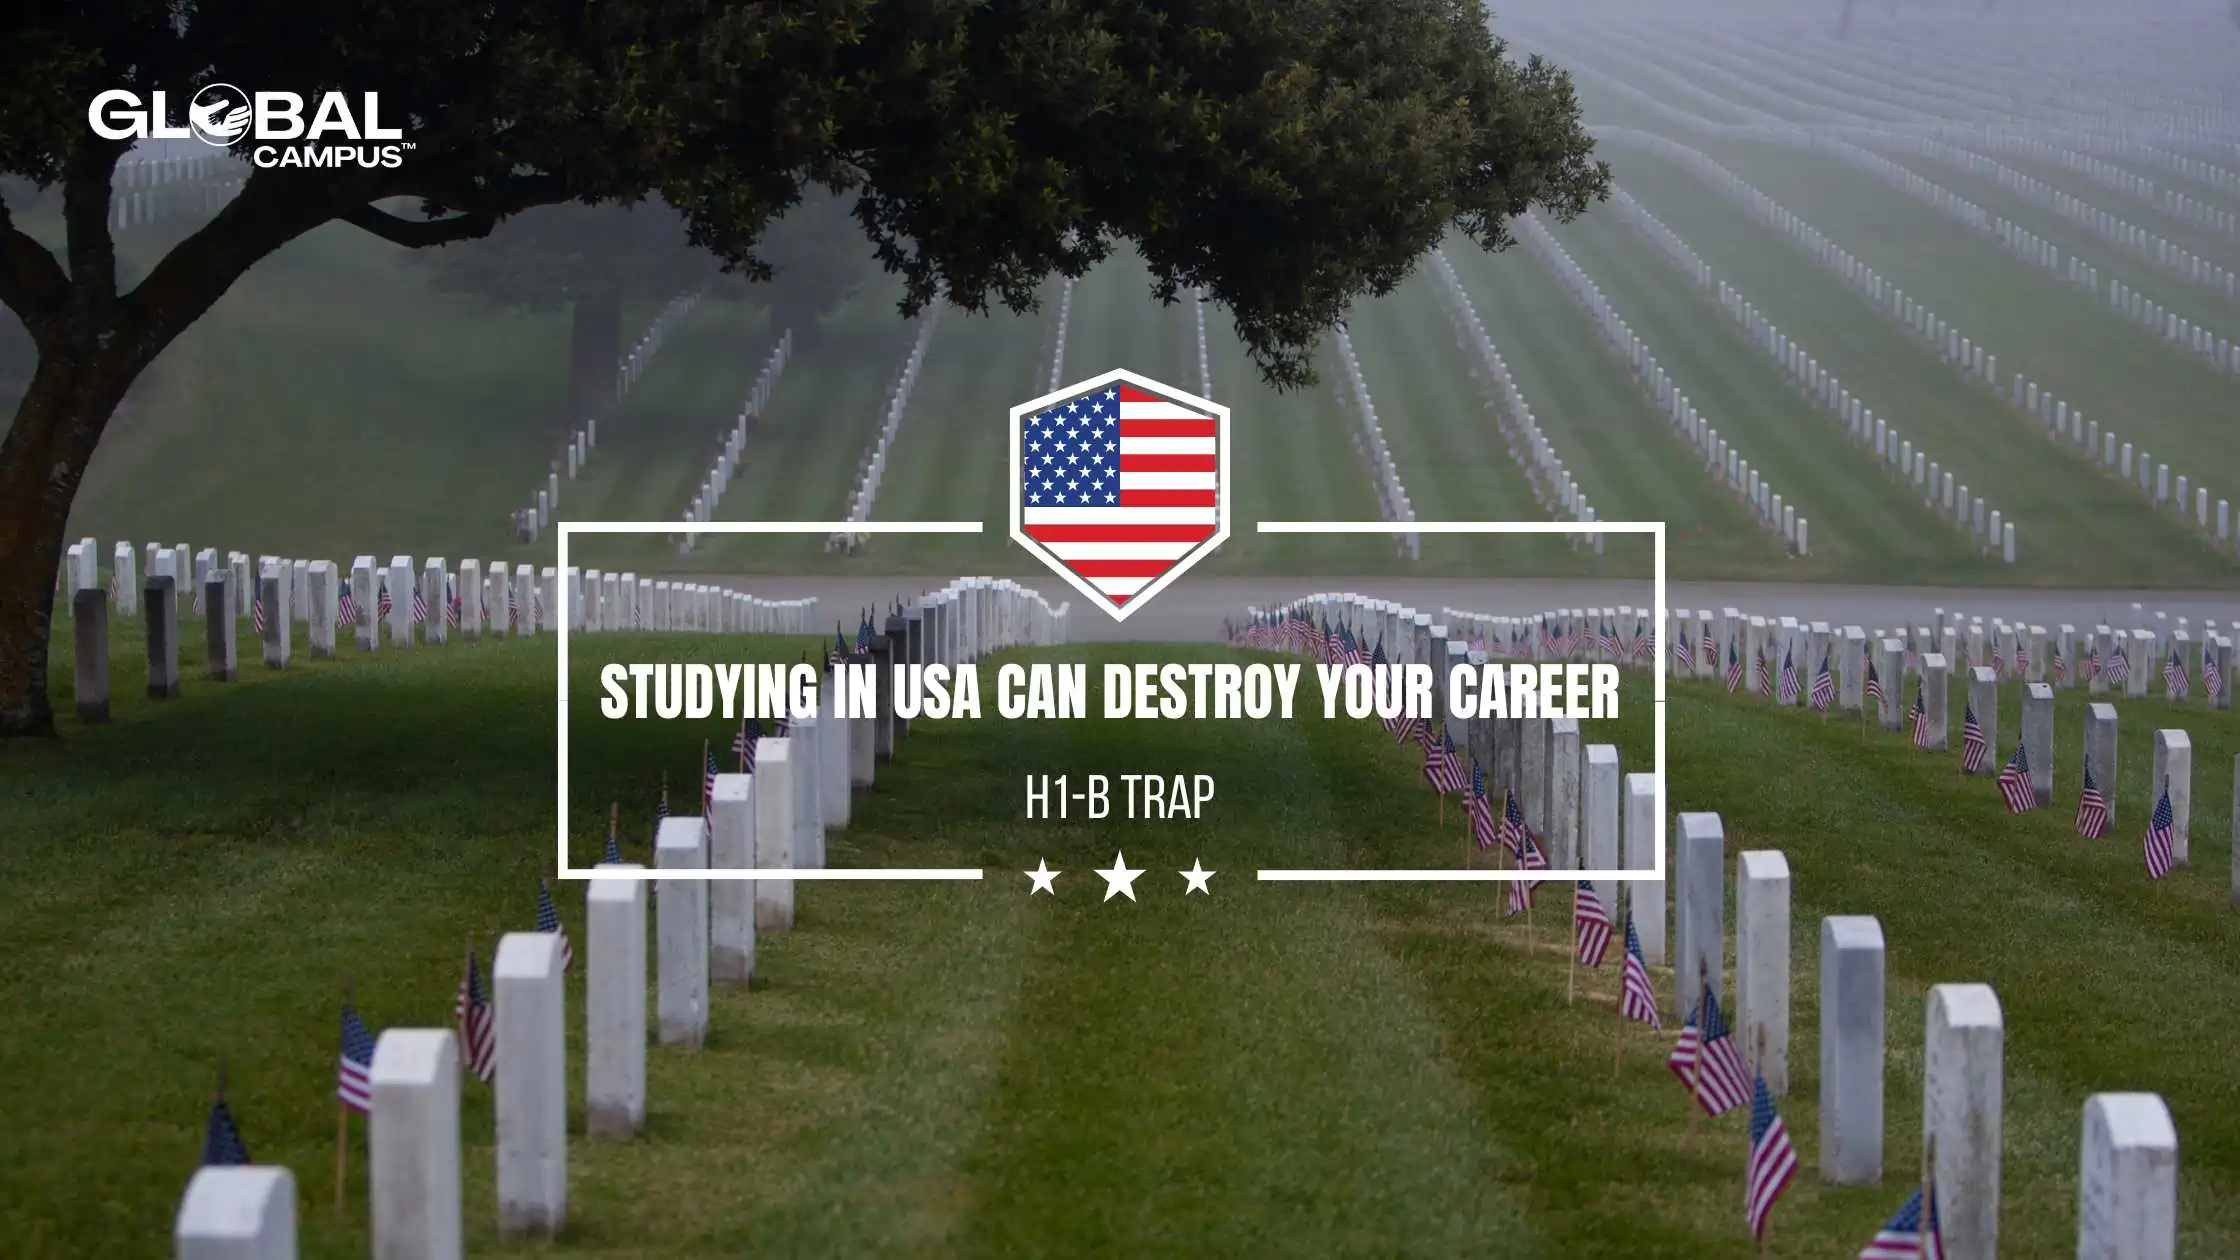 A graveyard depicting that Studying in USA can destroy careers for international students because of H1-B Visa Trap